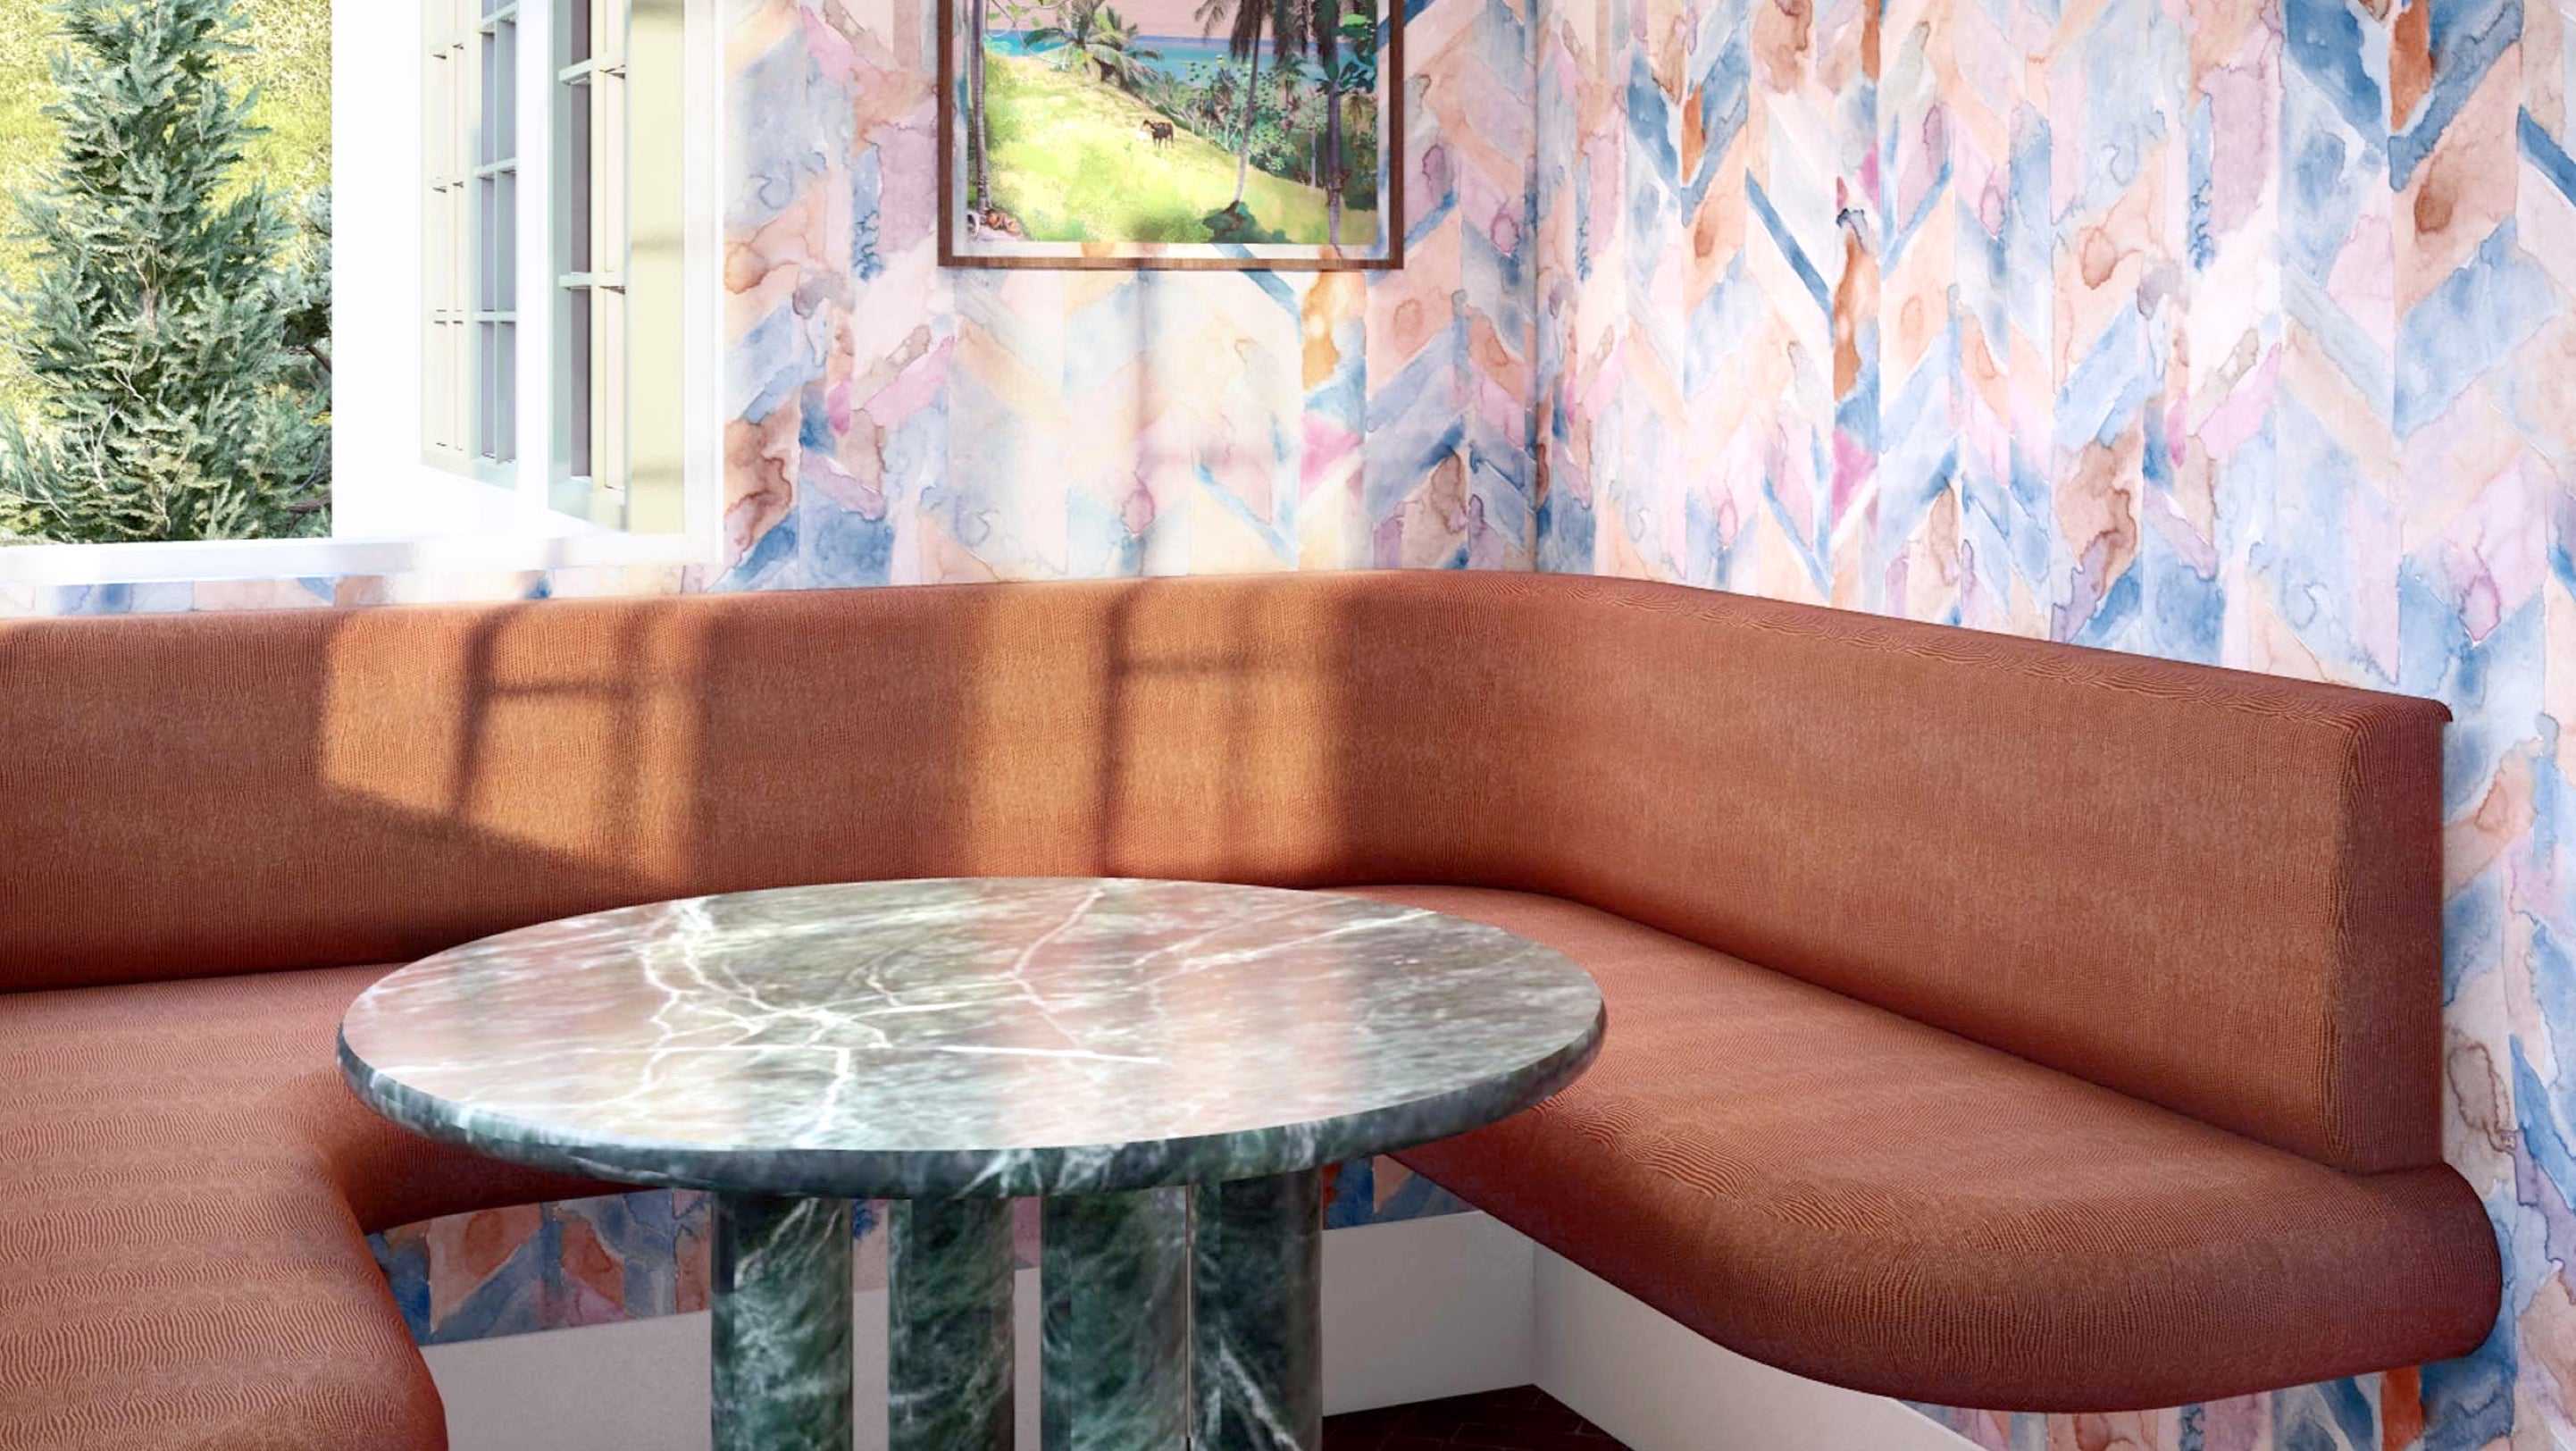 A table and chairs in a room with colorful wallpaper